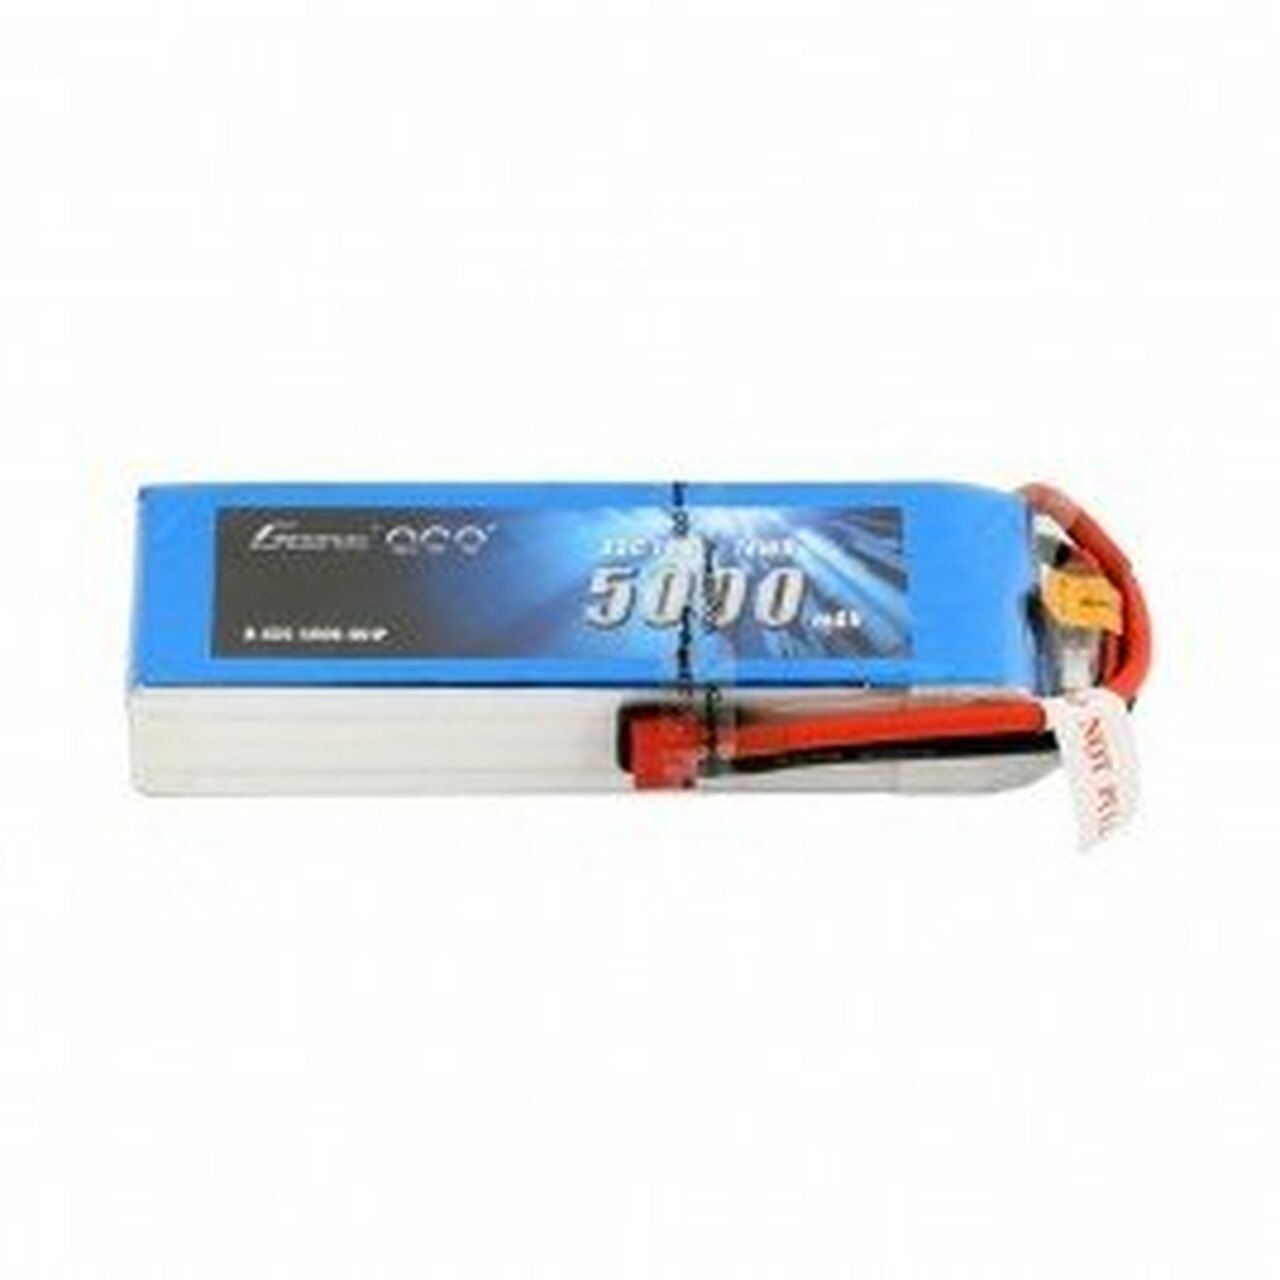 Gens ace 5000mAh 14.8V 45C 4S1P Lipo Battery Pack with Deans Plug